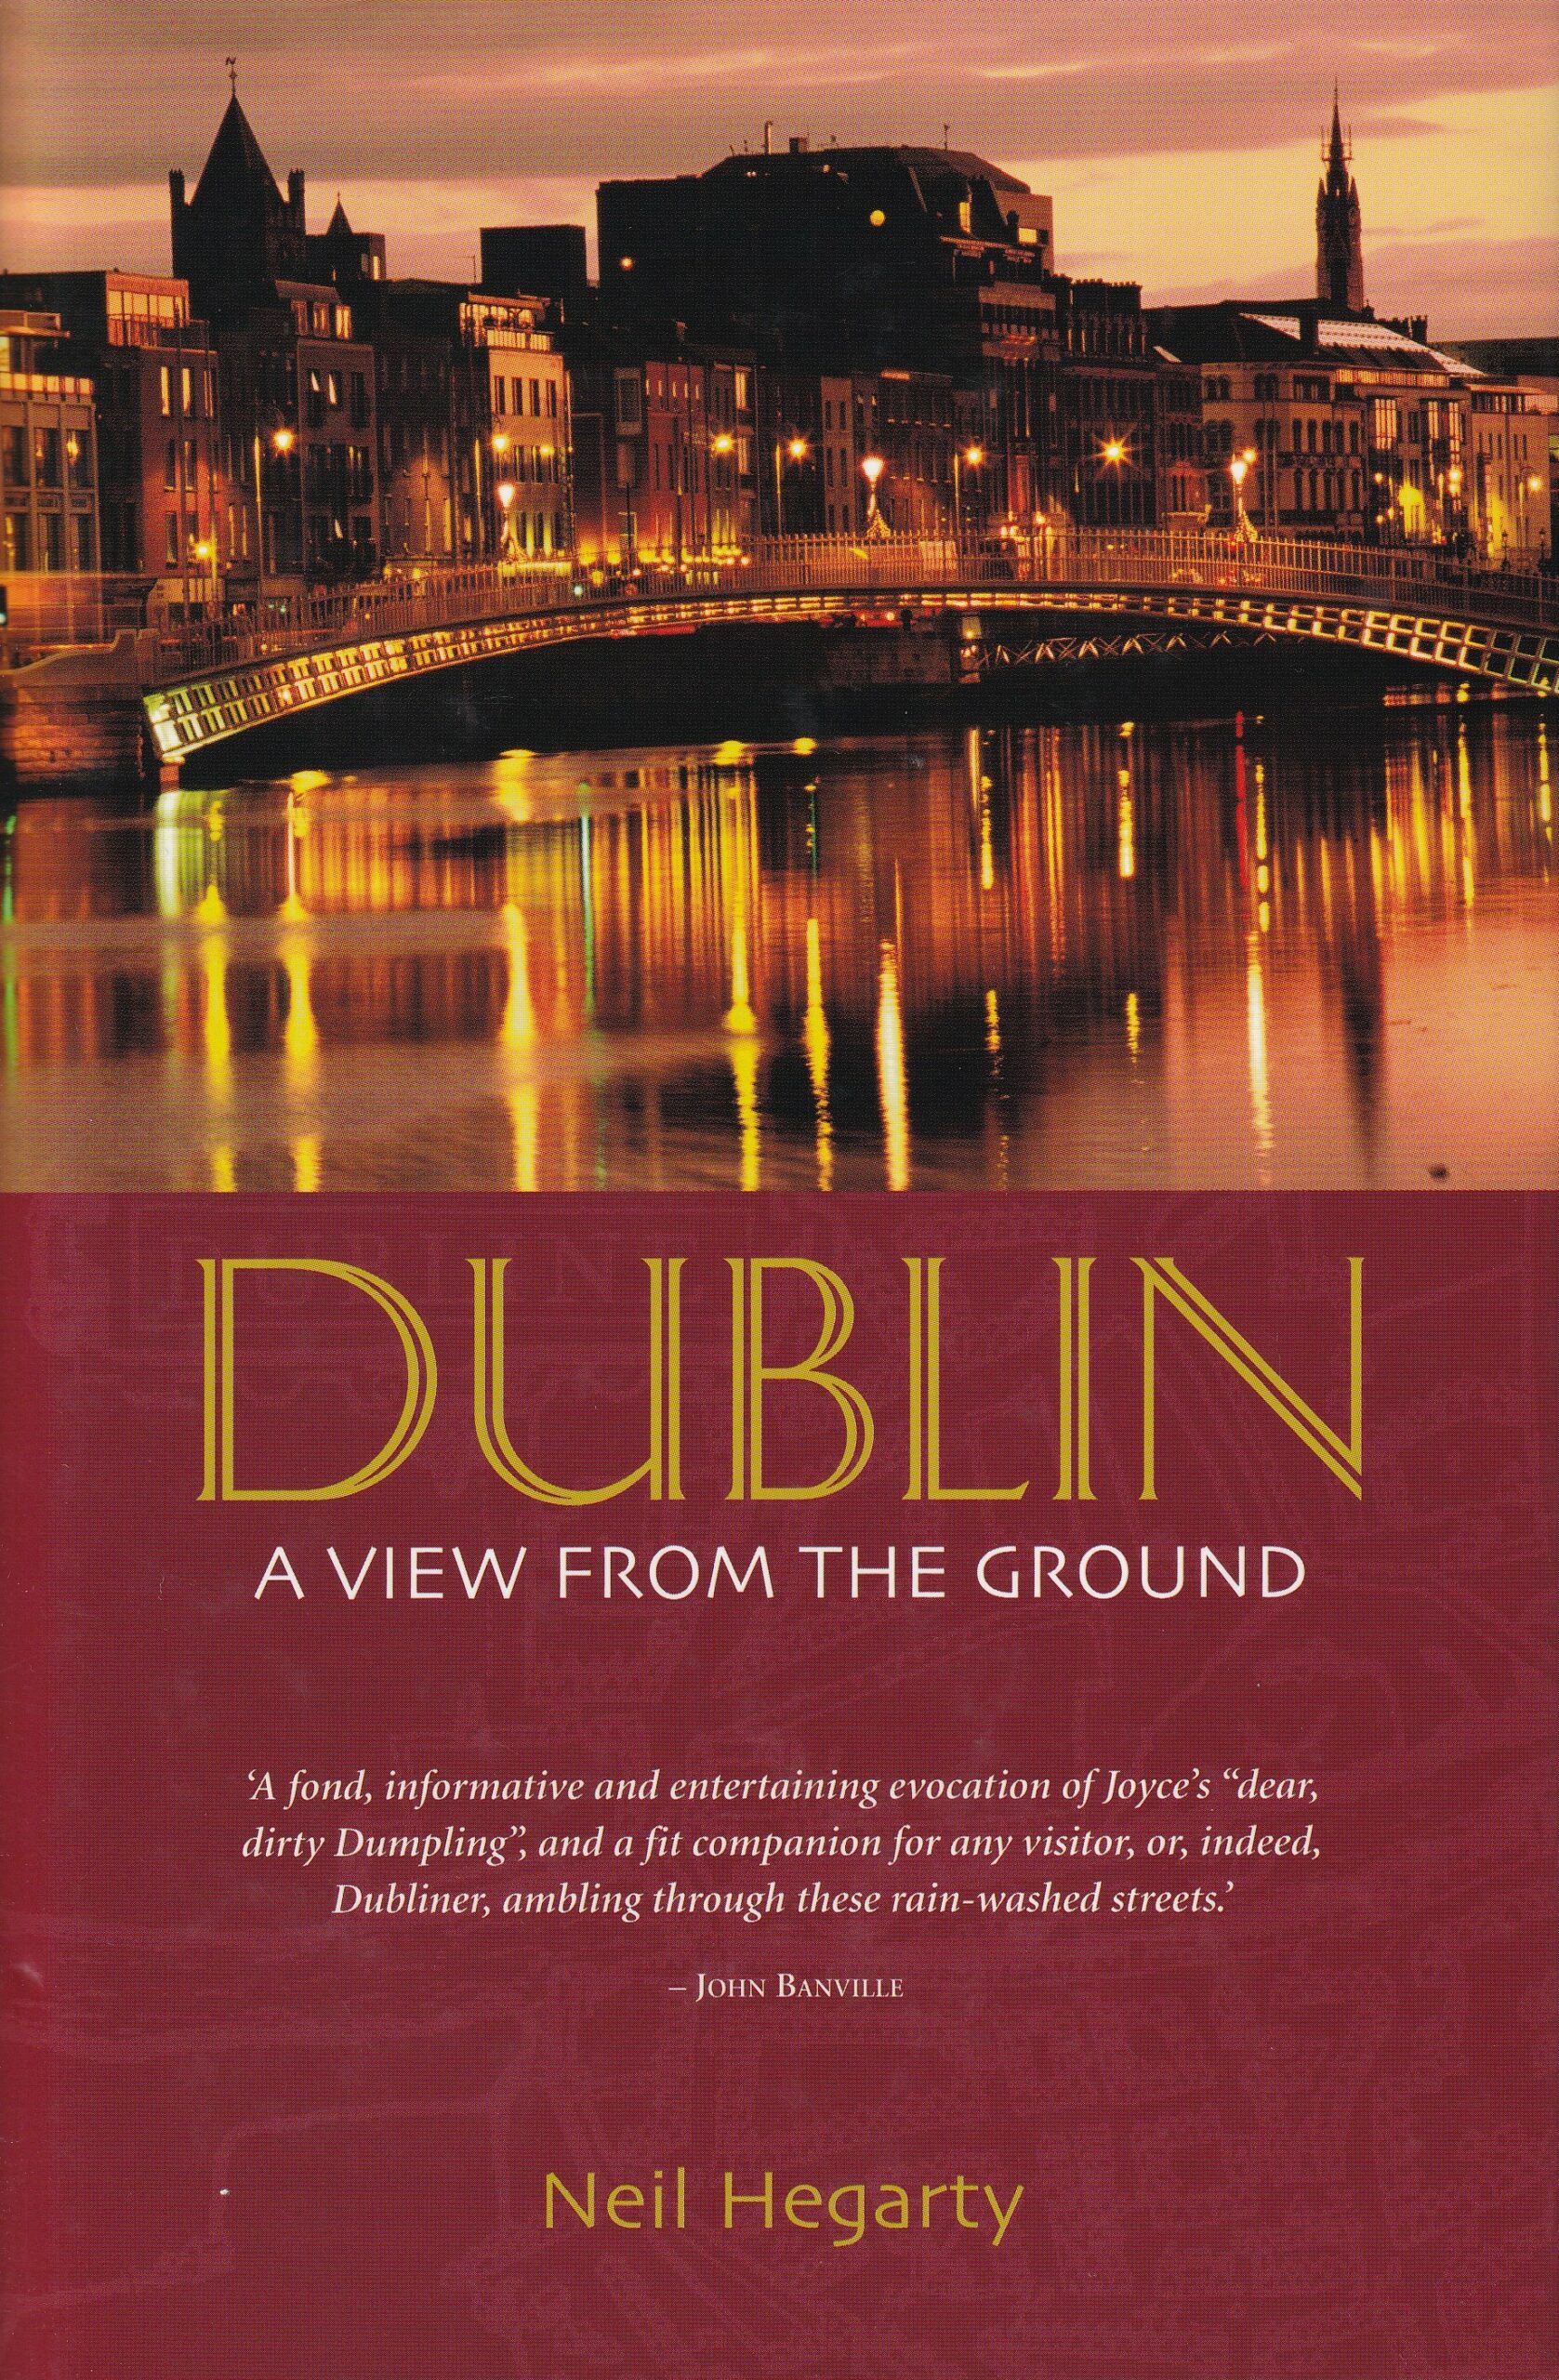 Dublin: A View from the Ground | Neil Hegarty | Charlie Byrne's